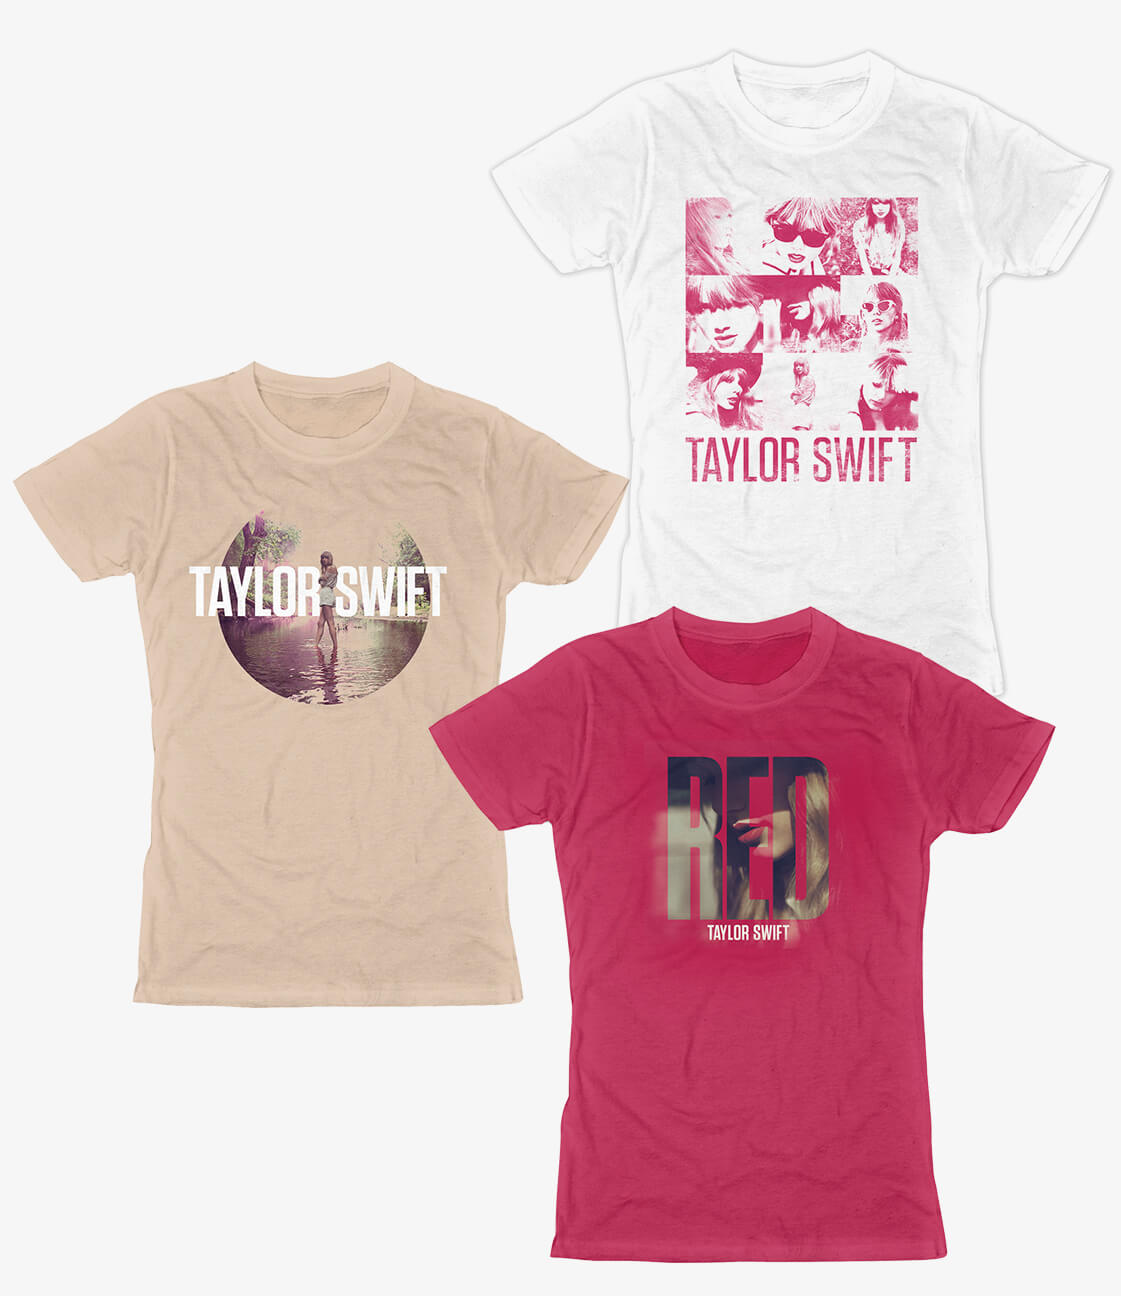 T-shirt designs 2 for the Red tour for Taylor Swift in Nashville, Tennessee